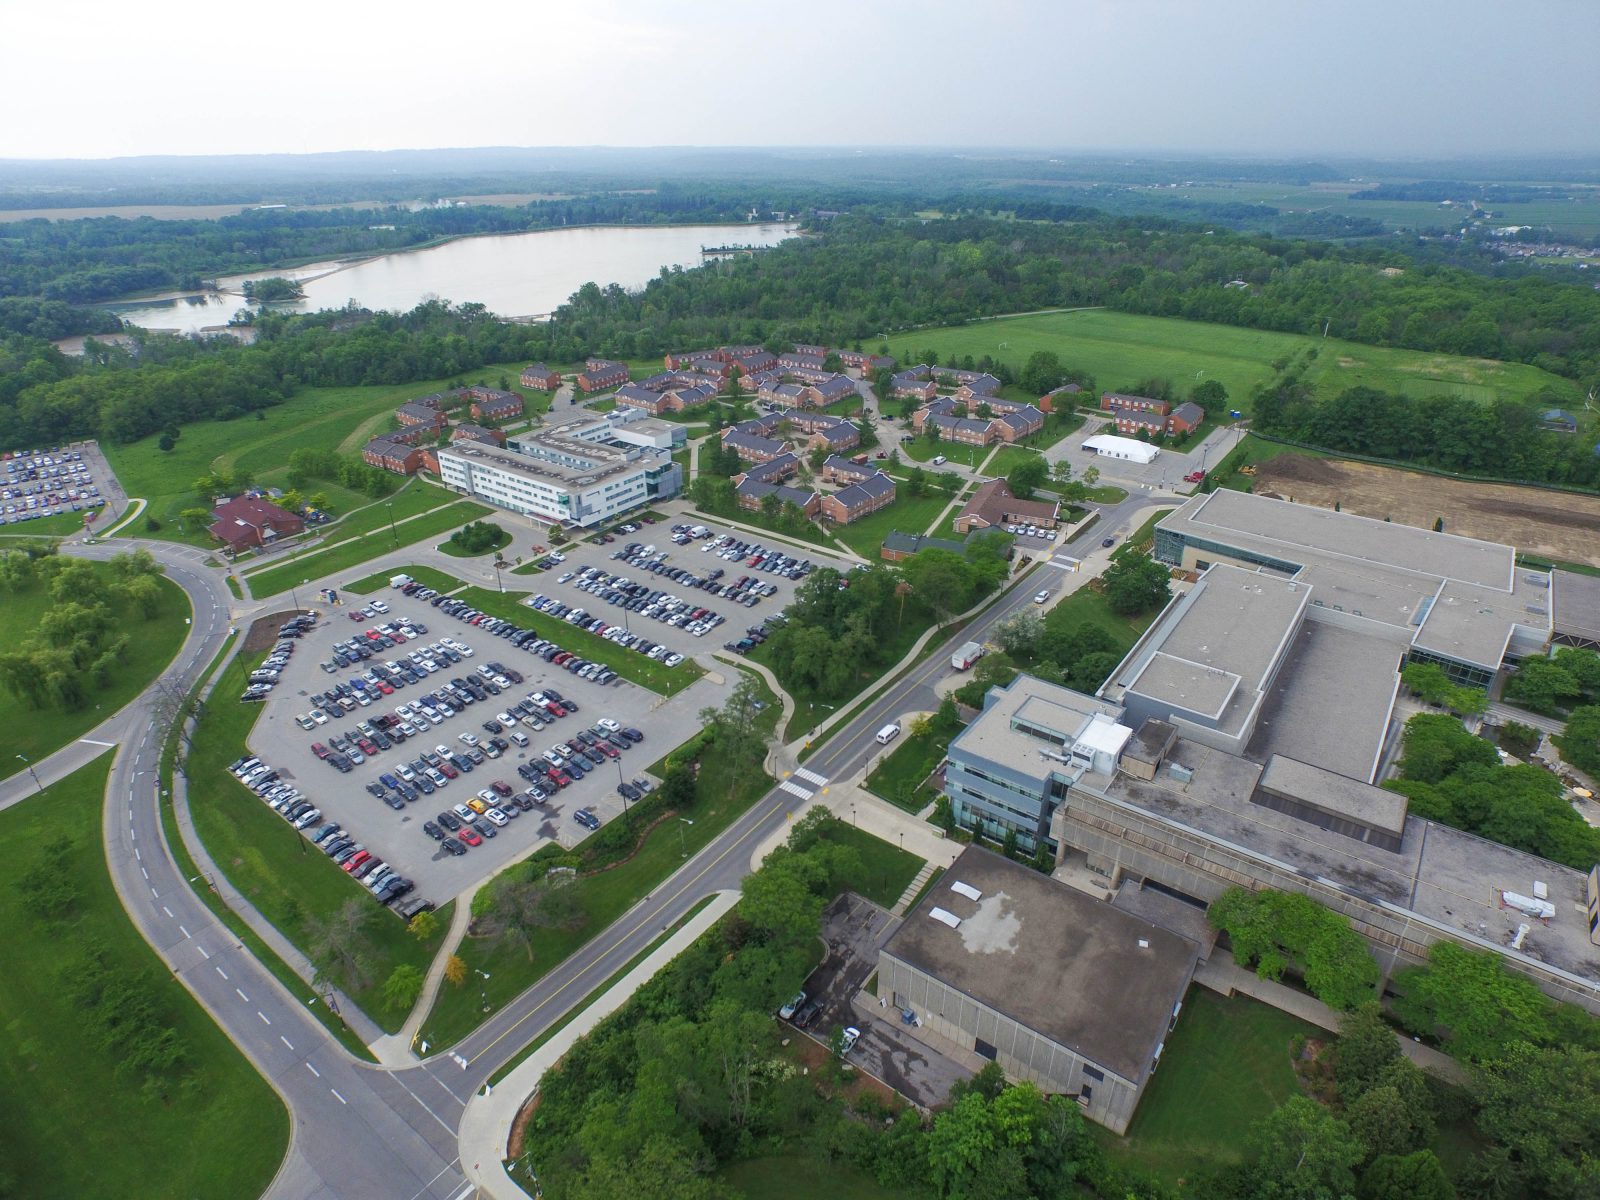 An aerial image of campus